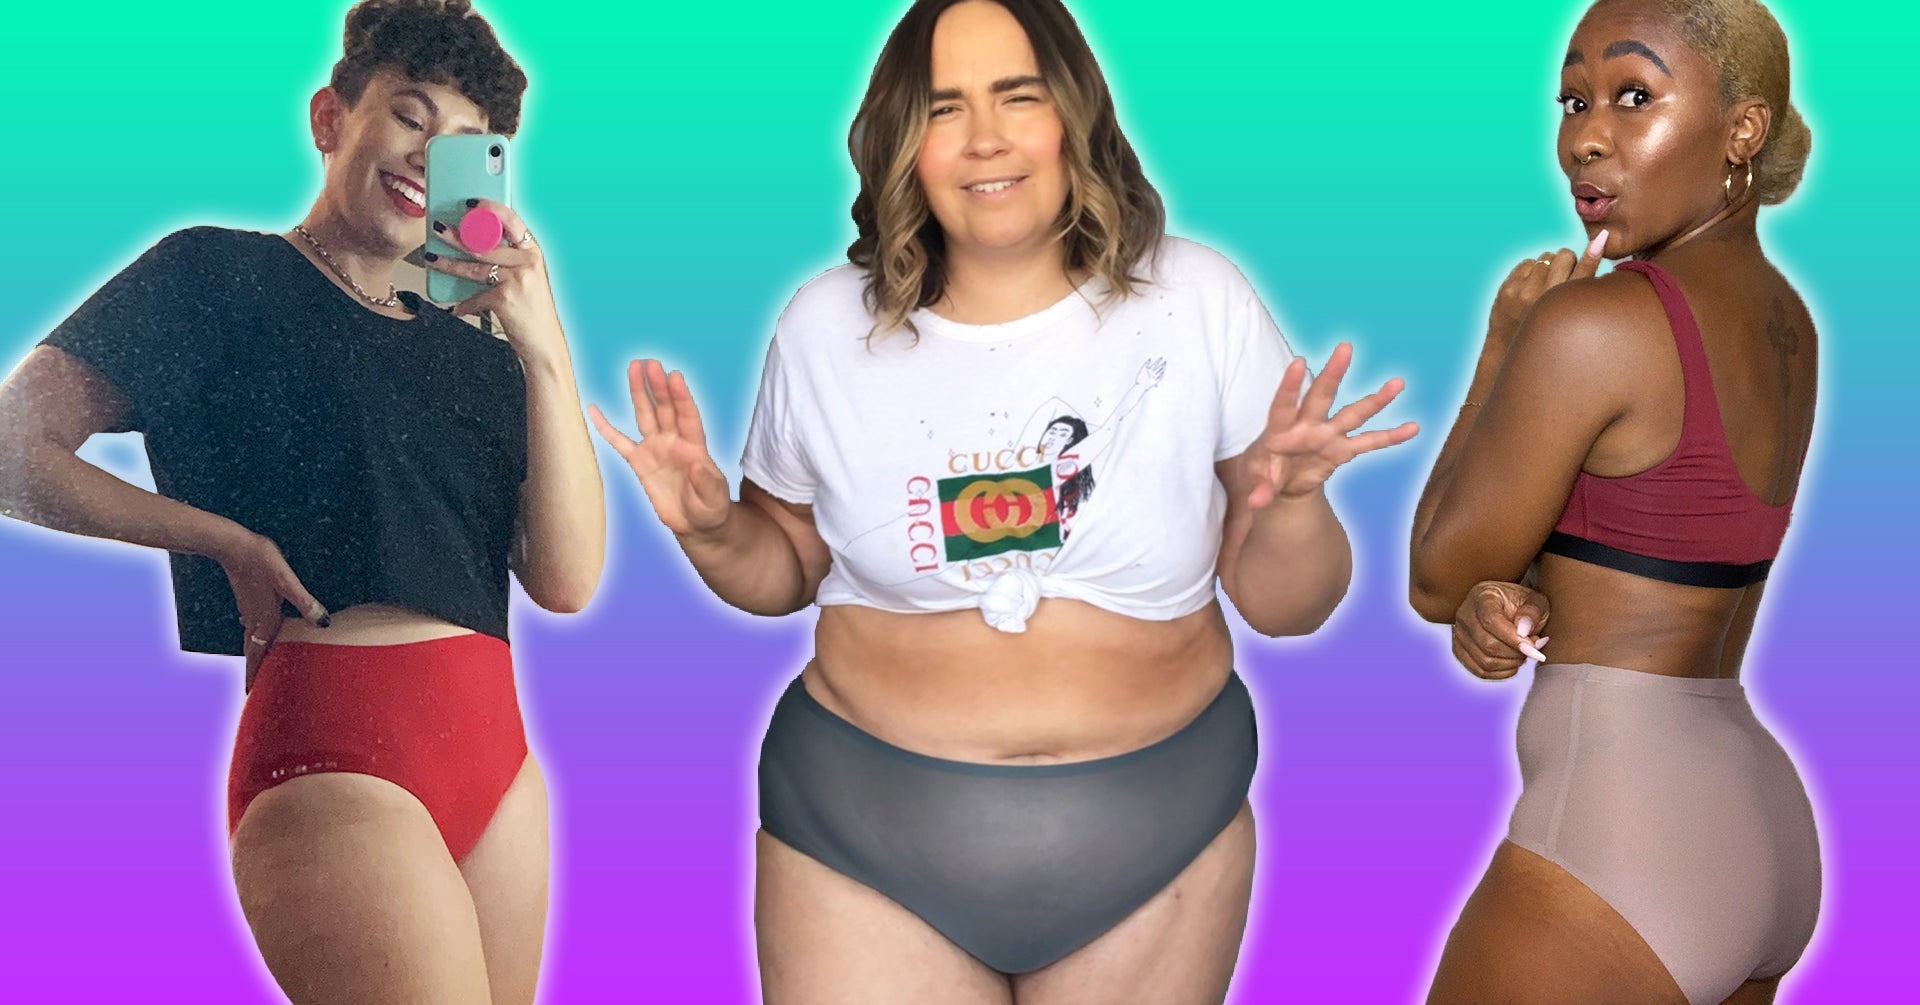 We Tried One Size Fits All Underwear: The Results Were Great